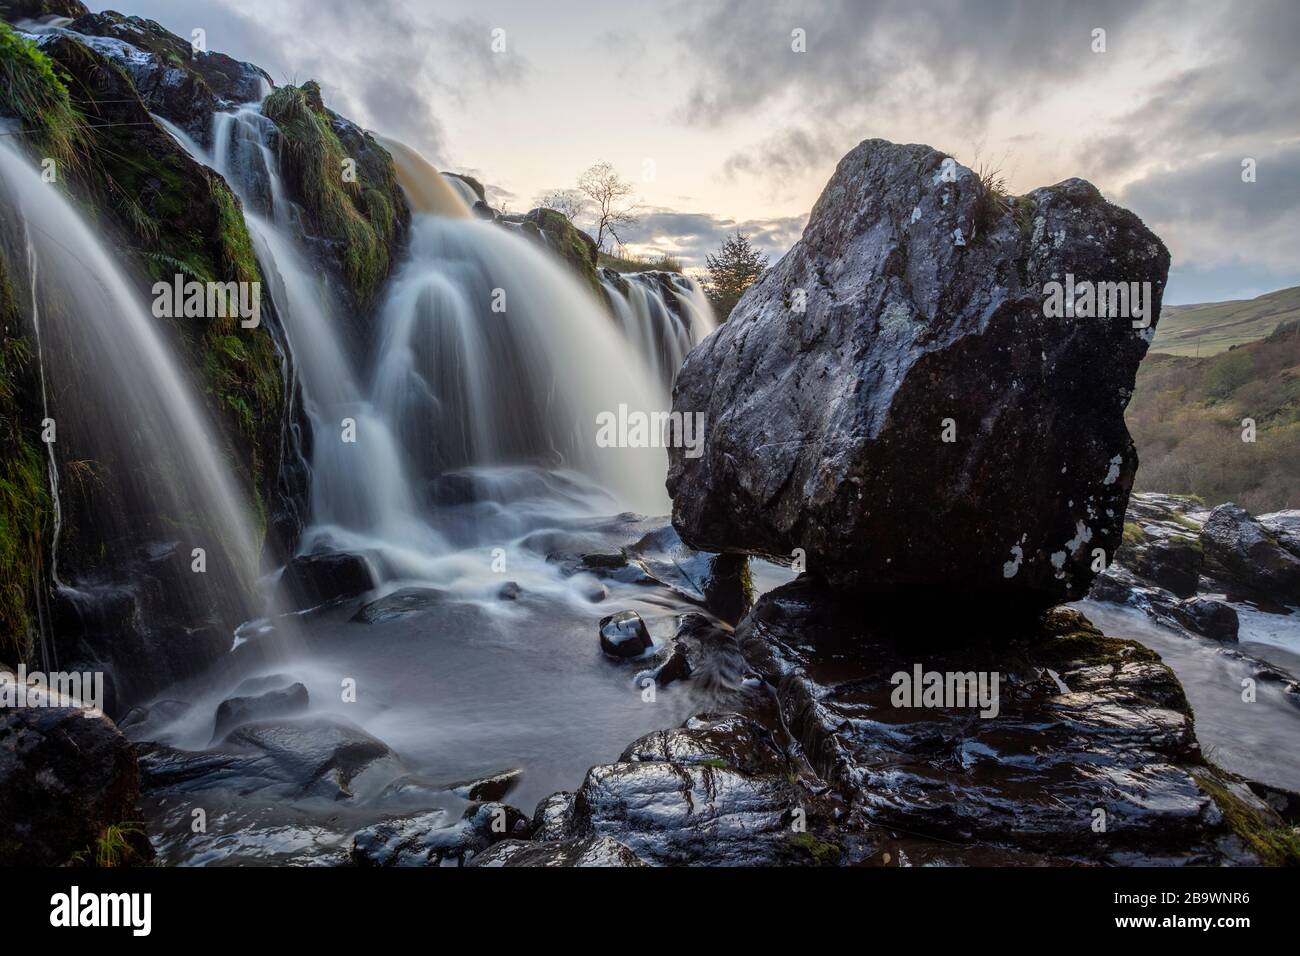 A huge boulder among the waterfalls of the Loup of Fintry, Stirling, Scotland. Stock Photo